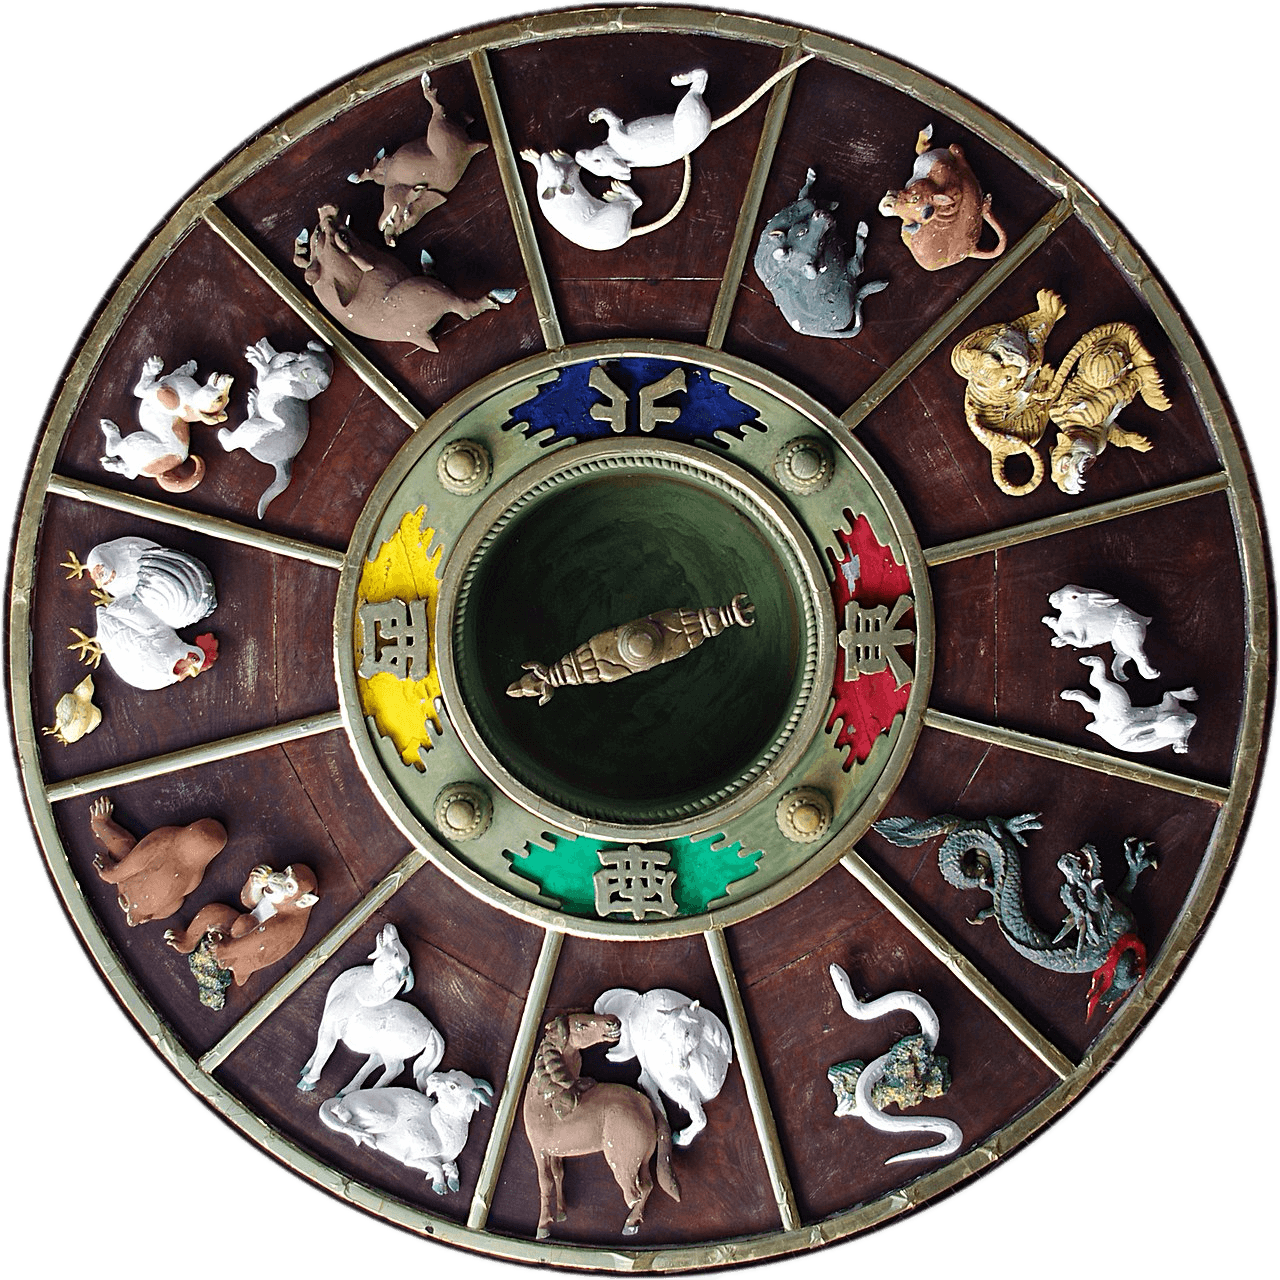 A Chinese zodiac wheel with carvings of its 12 animal signs